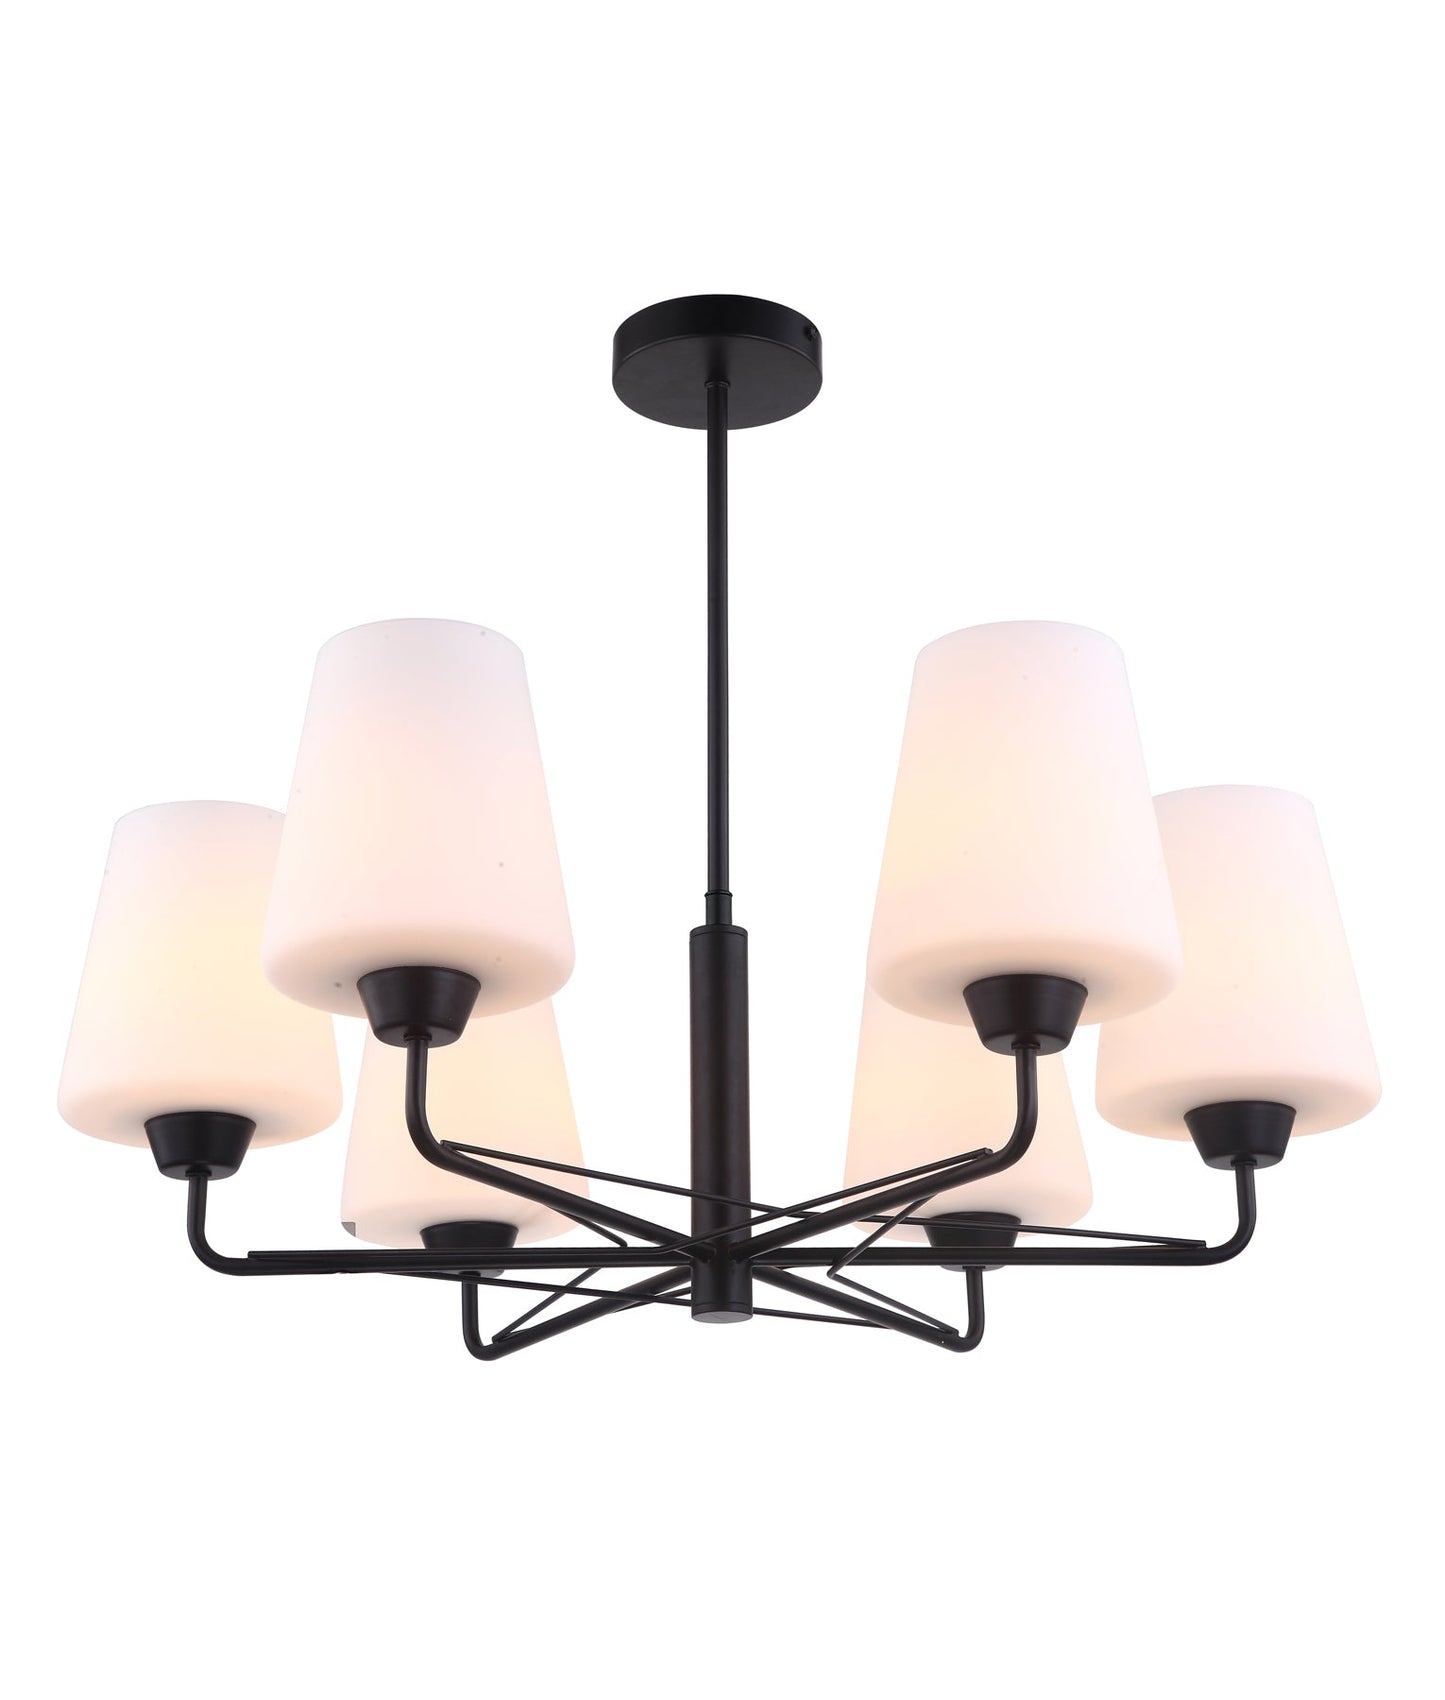 ABBEY: Interior Traditional 6 Lamps Opal Glass Pendant Lights